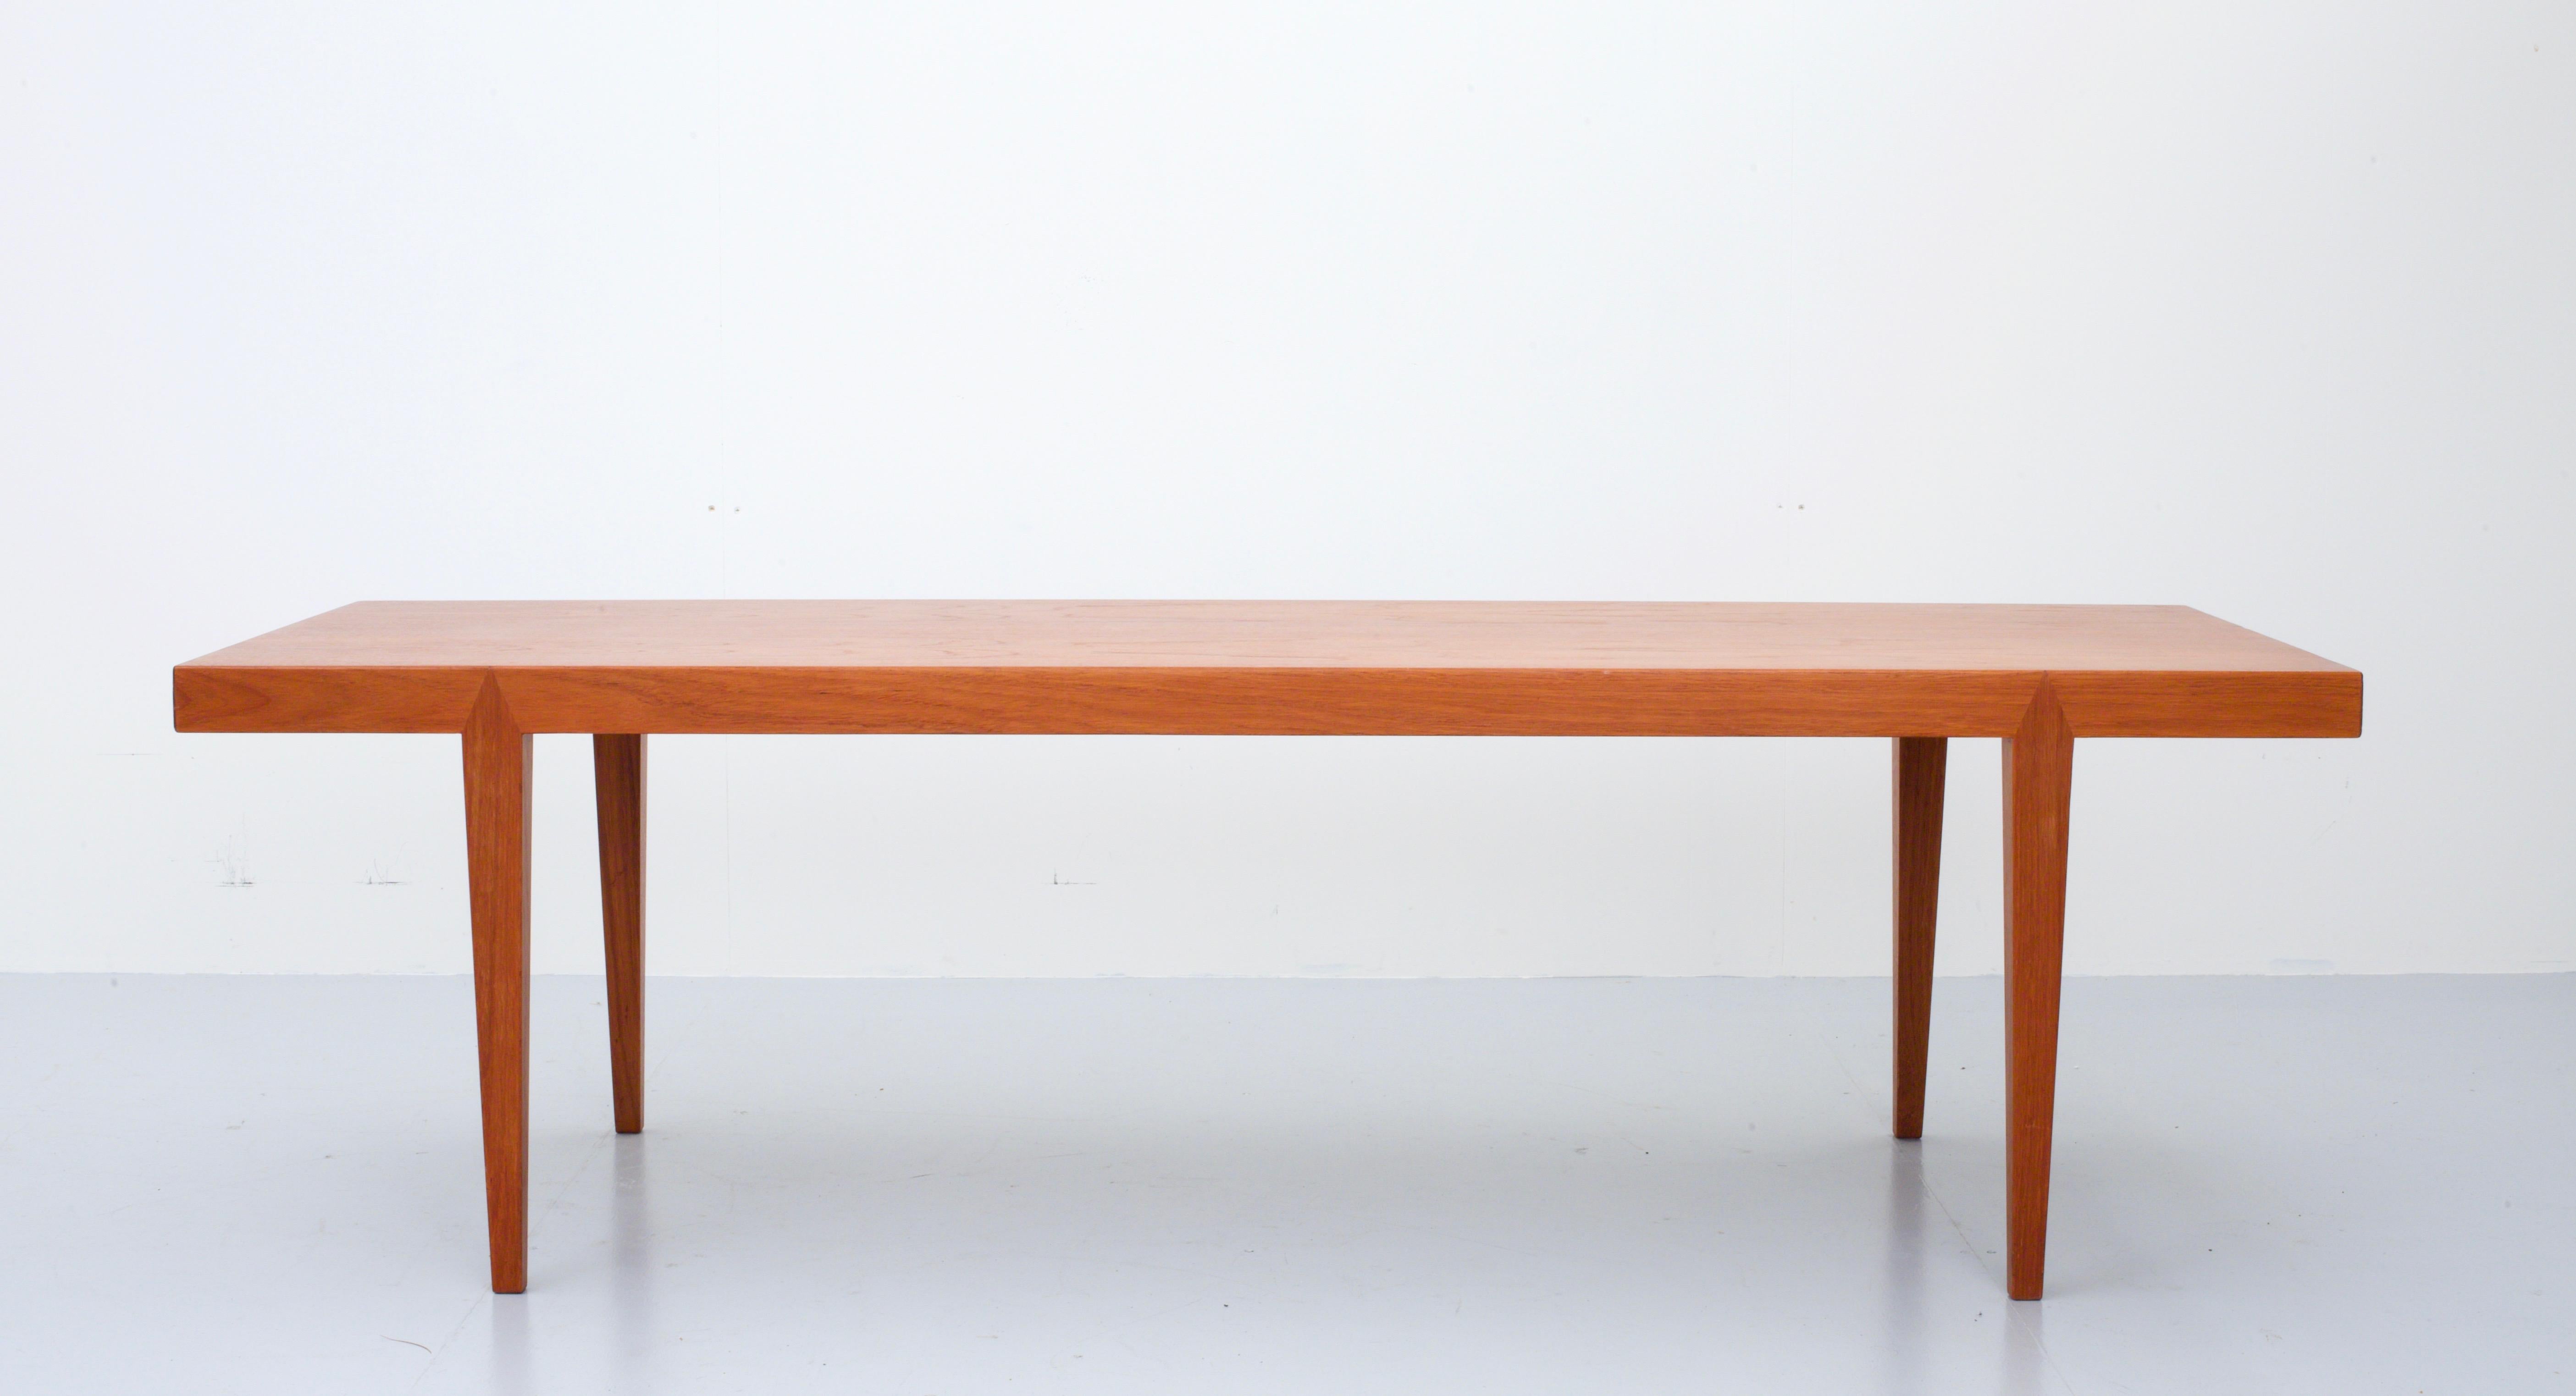 Large coffee table by Severin Hansen for Bovenkamp in splendid condition. The top is still very good with hardly any traces of use. The teak has aged nicely over the years and shows nice flames. The typical triangular joints that Severin Hansen uses